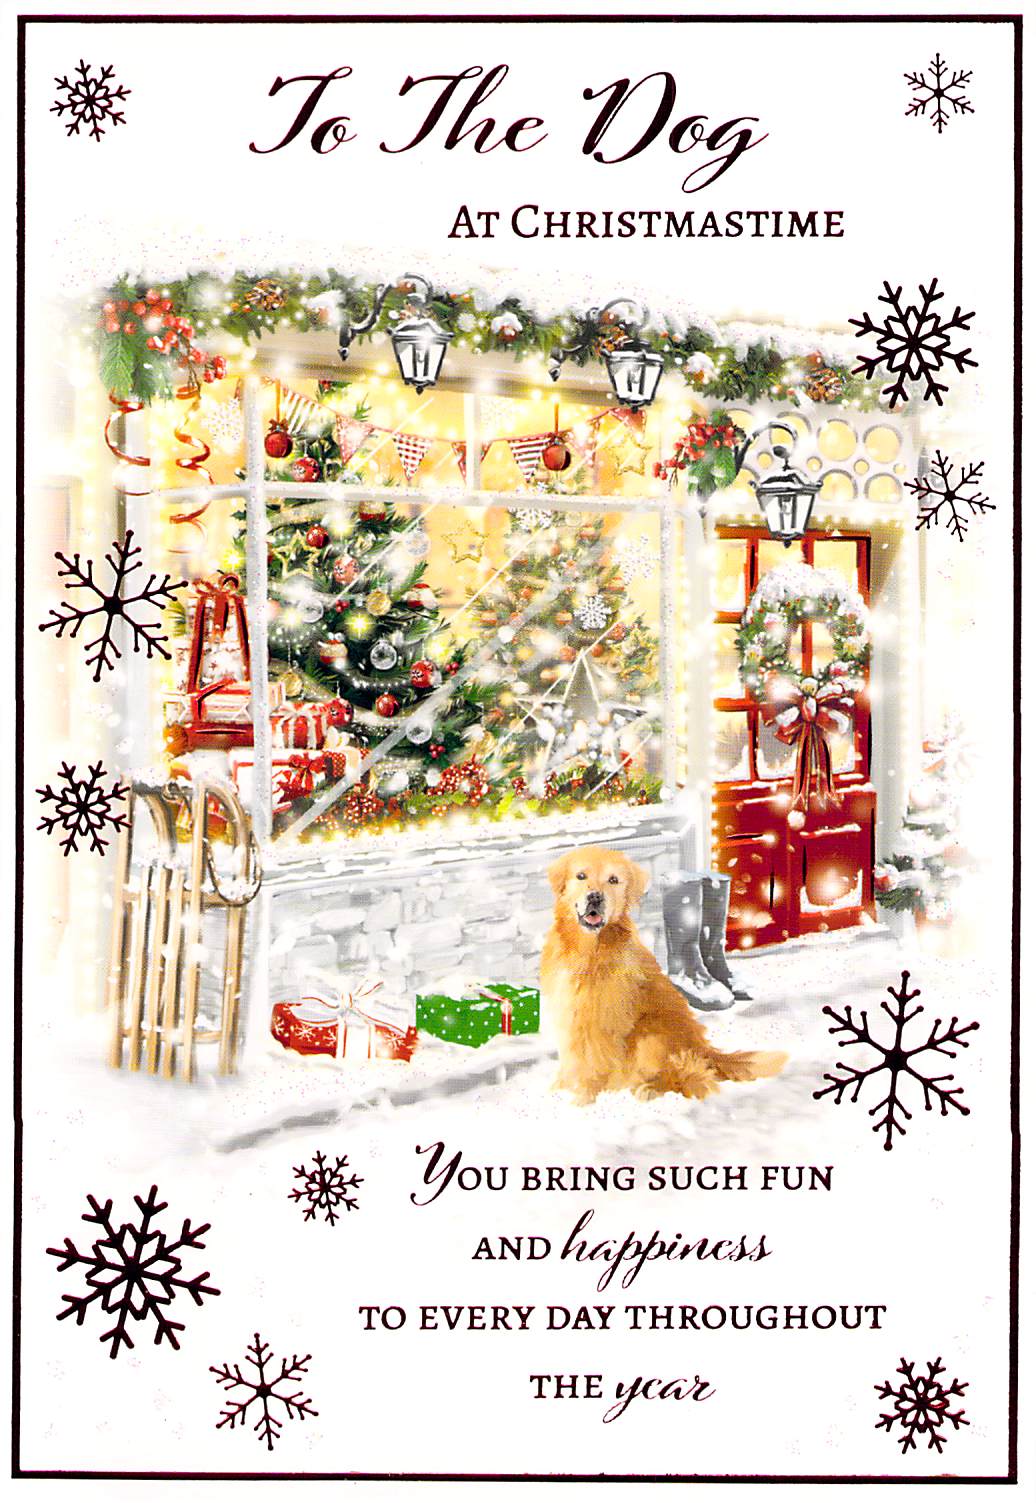 Christmas - To The Dog - Snowy Scene - Greeting Card  - Multi Buy Discount